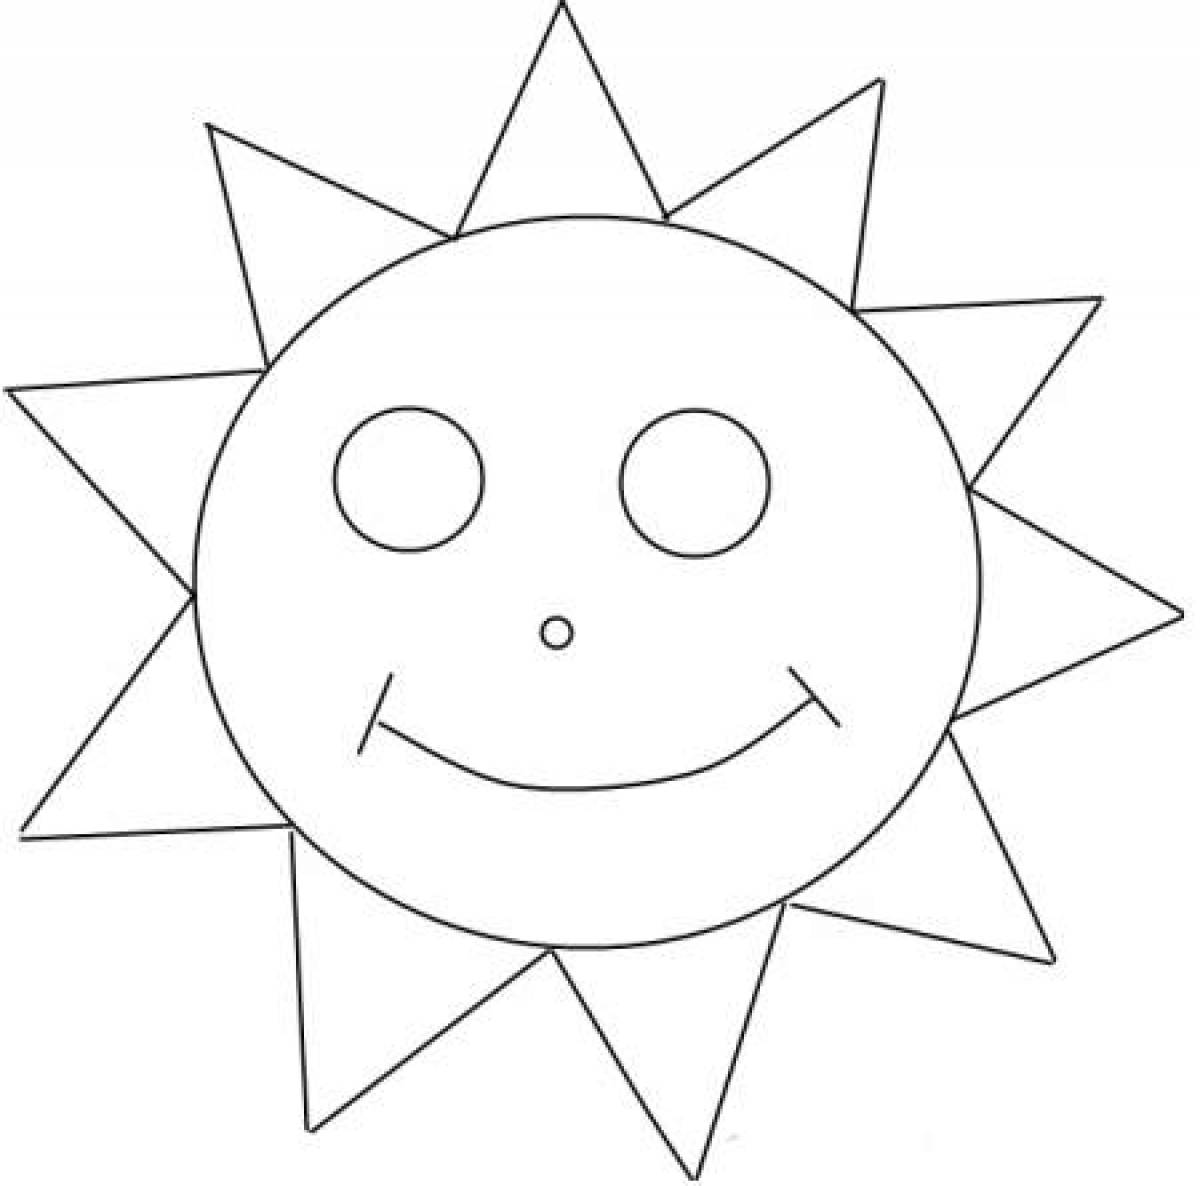 Large fnaf 9 sun and moon coloring book